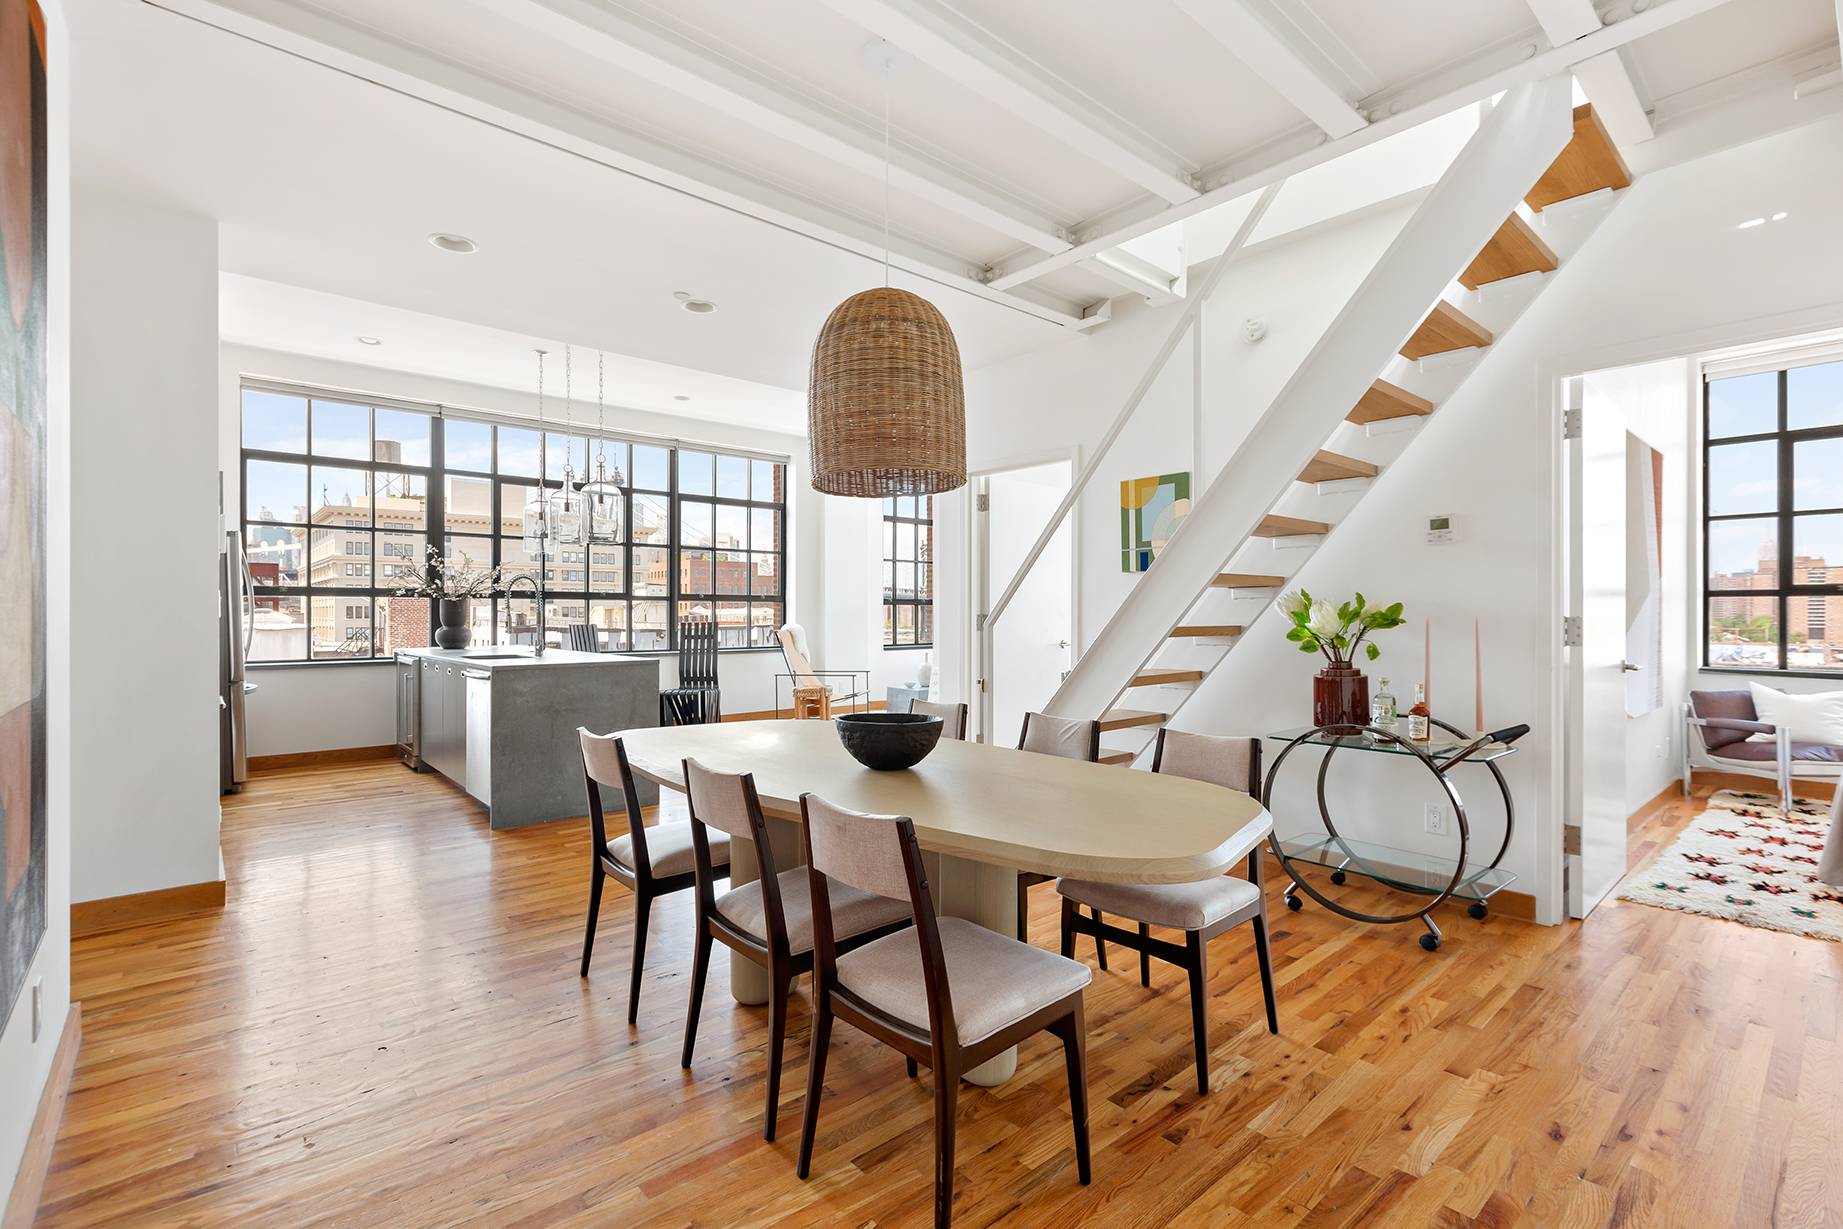 Boasting envious views and thoughtful upgrades, this corner three bedroom penthouse is a perfect blend of industrial style and modern comfort.